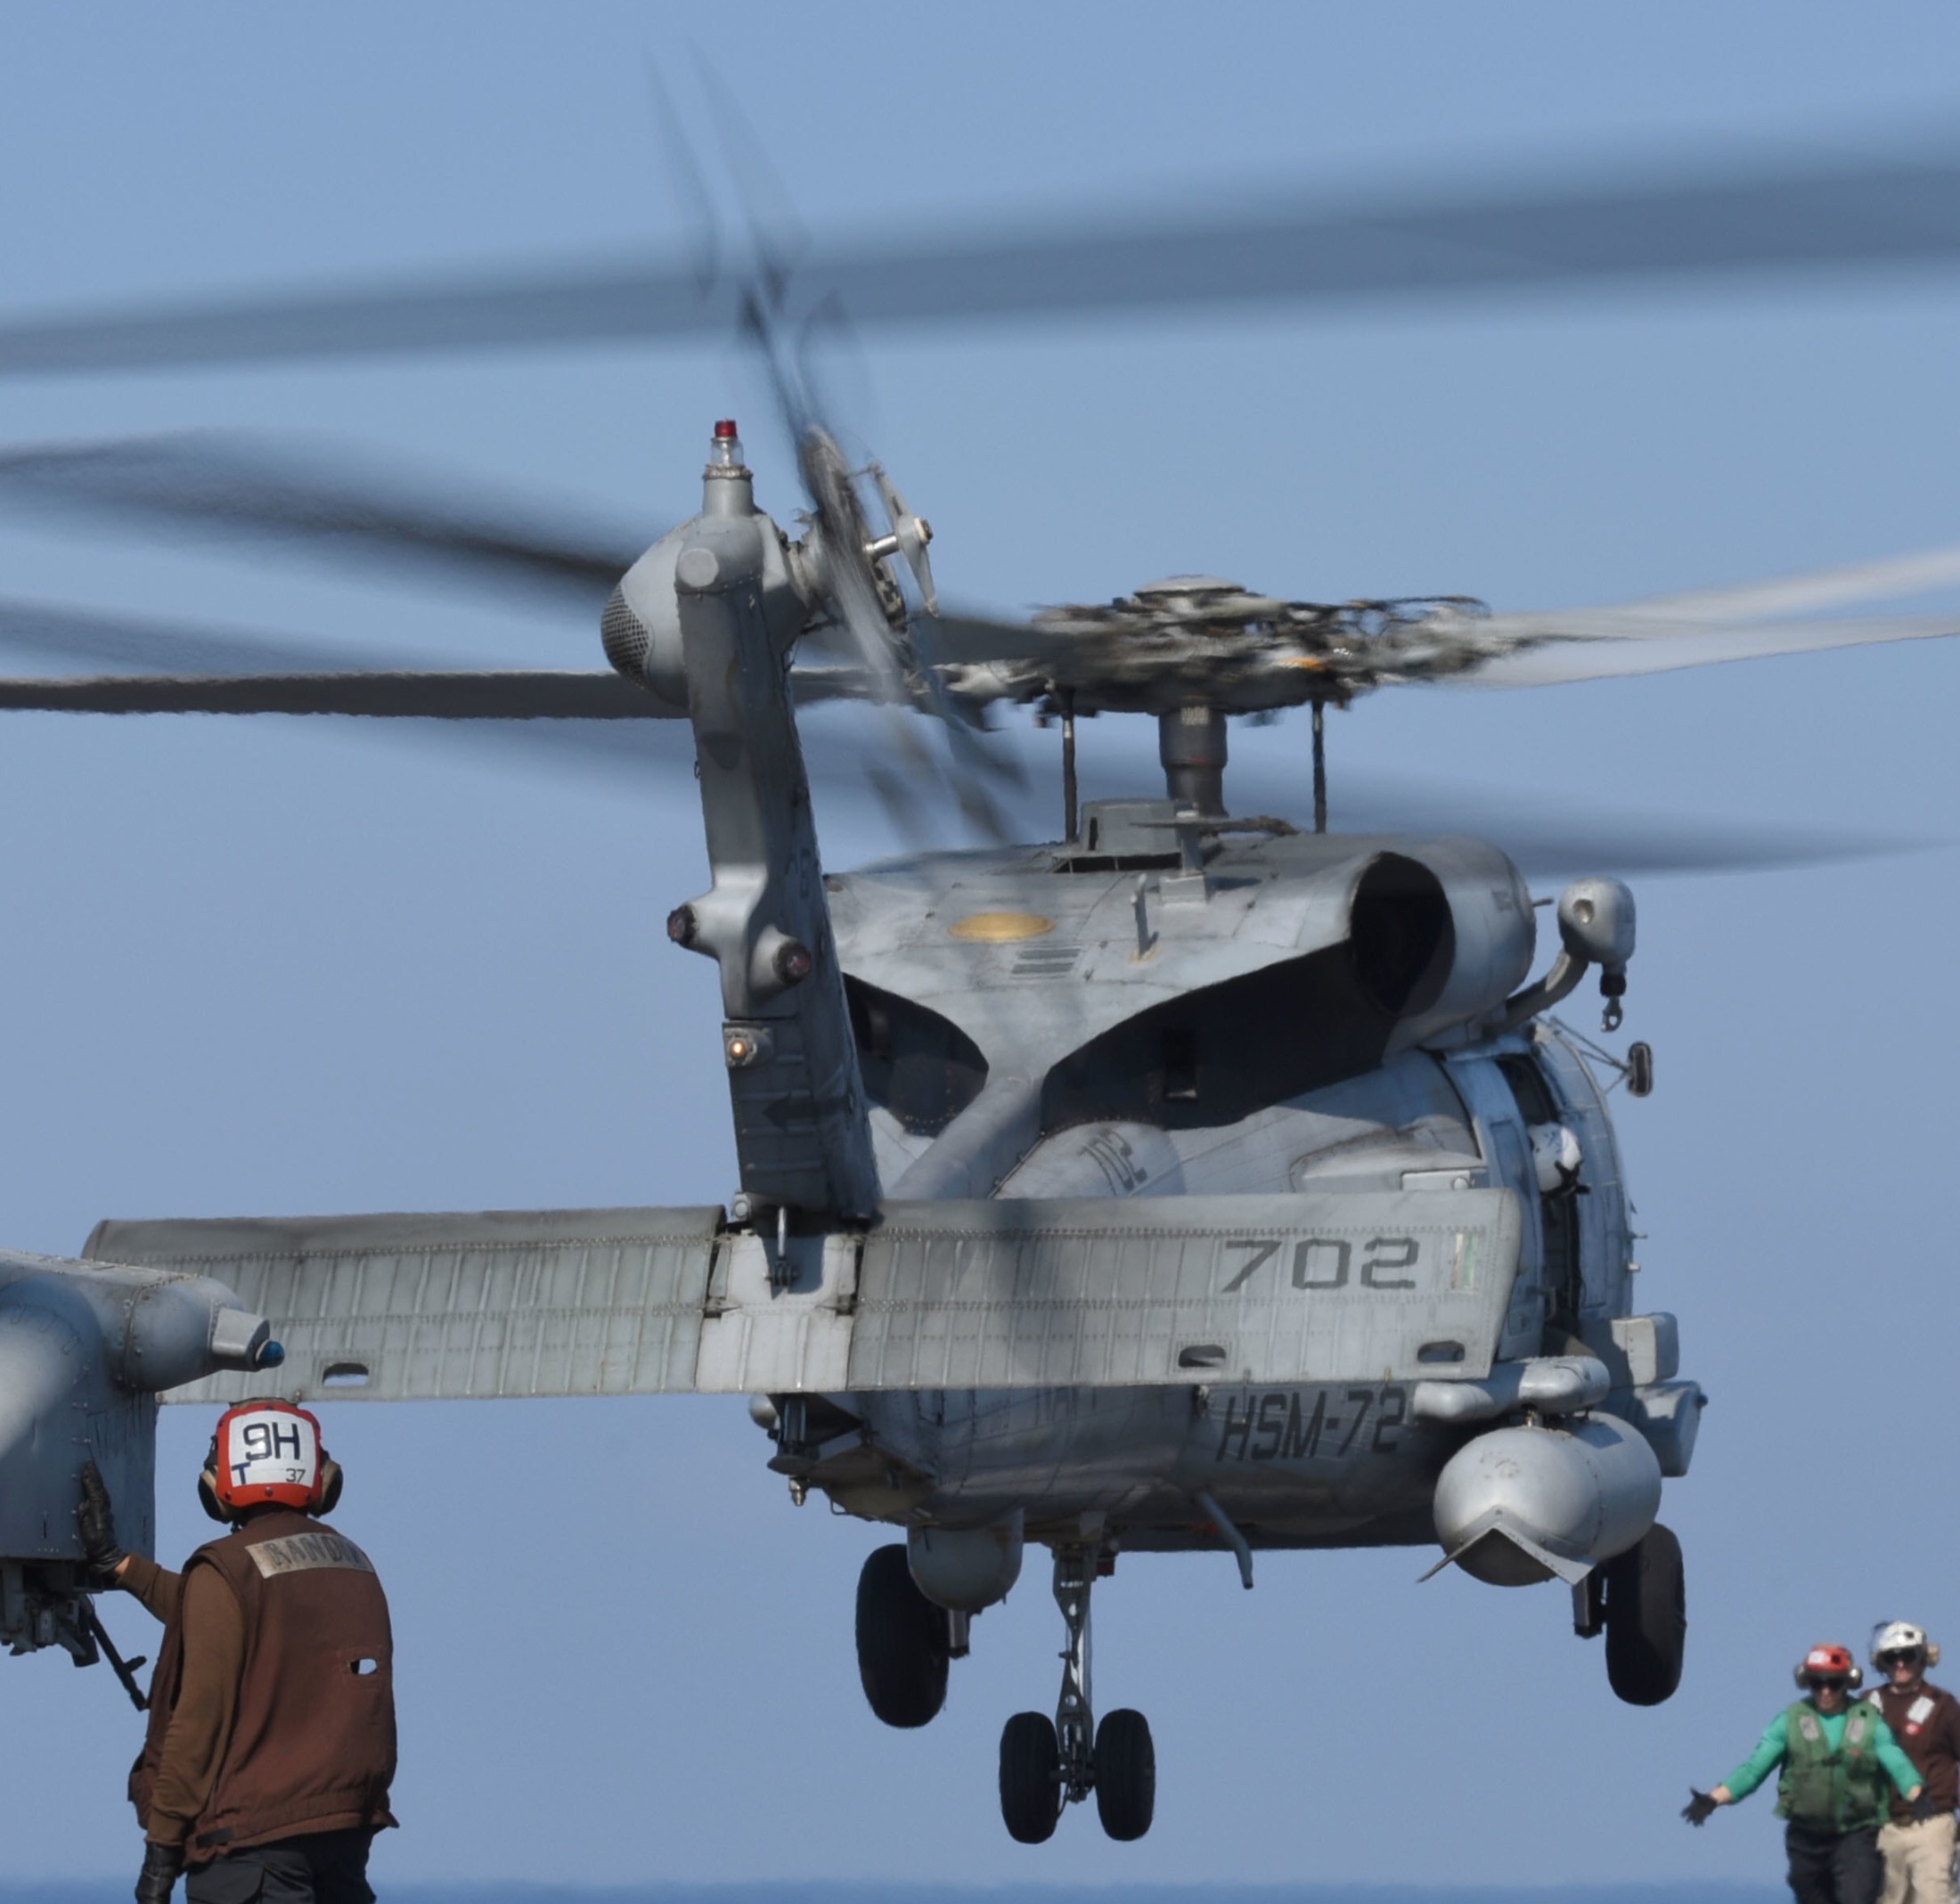 hsm-72 proud warriors helicopter maritime strike squadron us navy mh-60r seahawk 2015 23